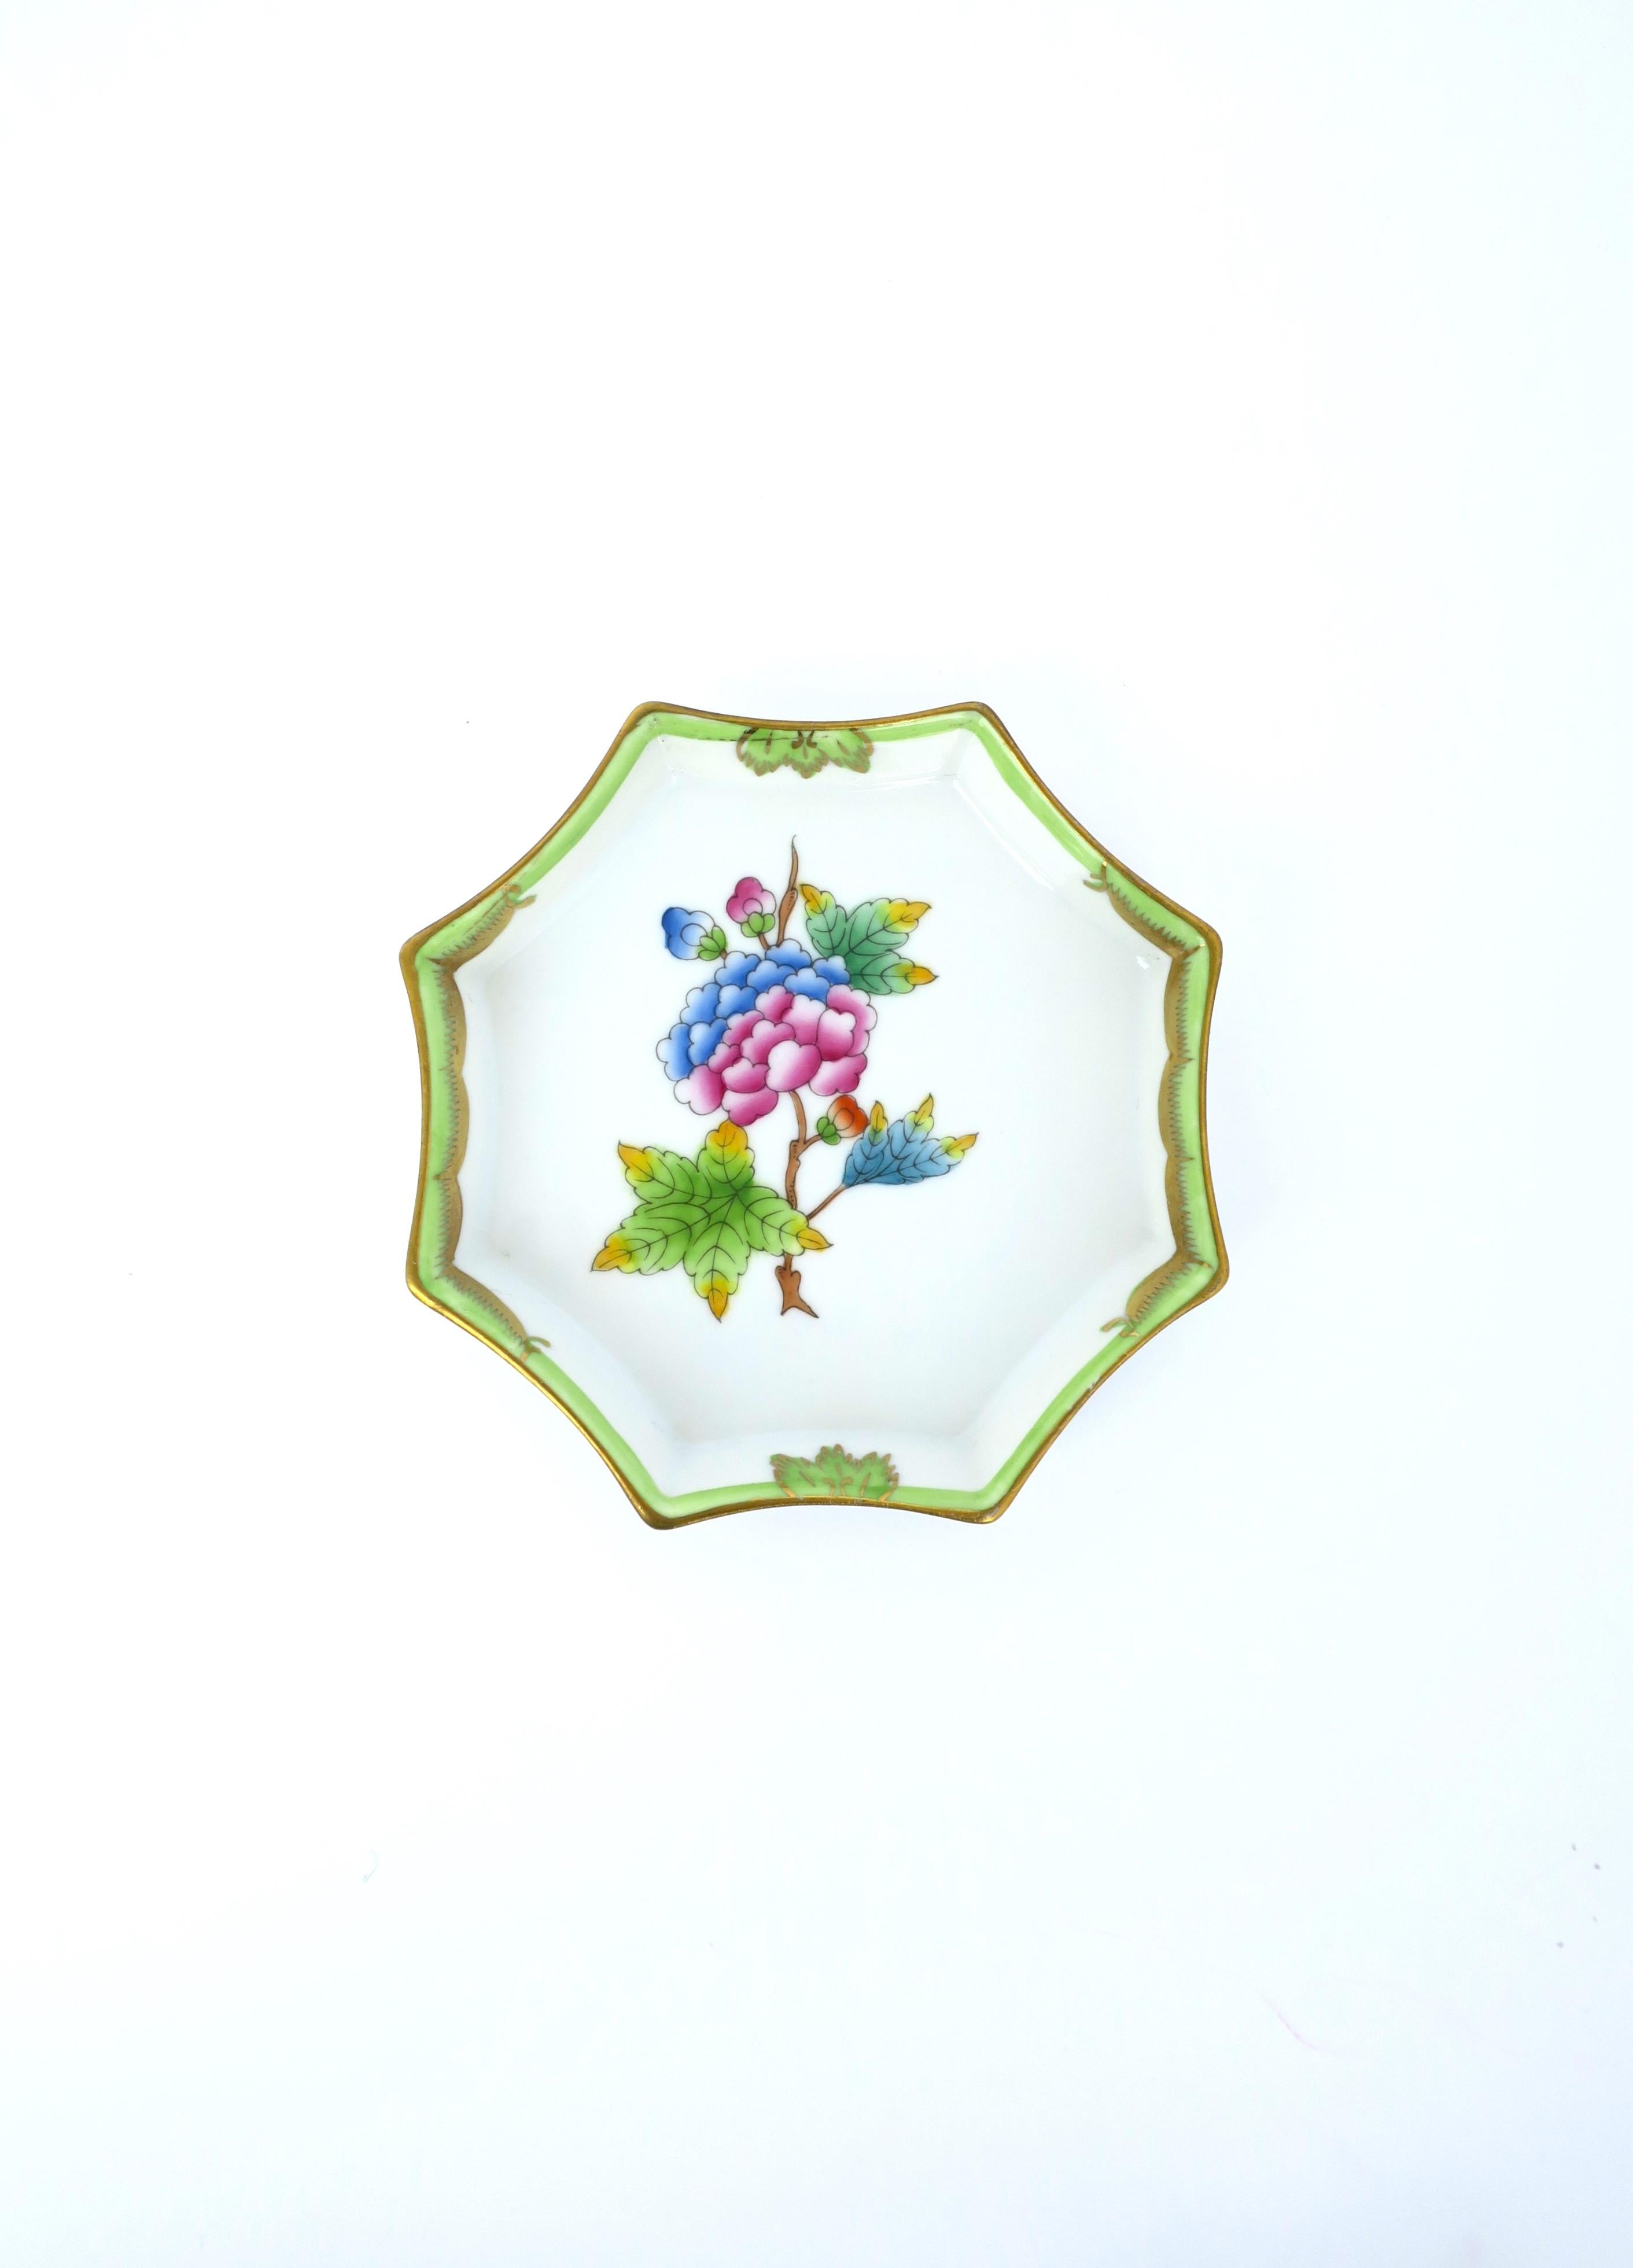 A very beautiful hand painted octagonal porcelain jewelry dish vide-poche from luxury maker Herend, circa 20th century, Hungary. Dish is octagonal with Queen Victoria design, a floral and leaf center and decorative edge finished in gold. Colors are